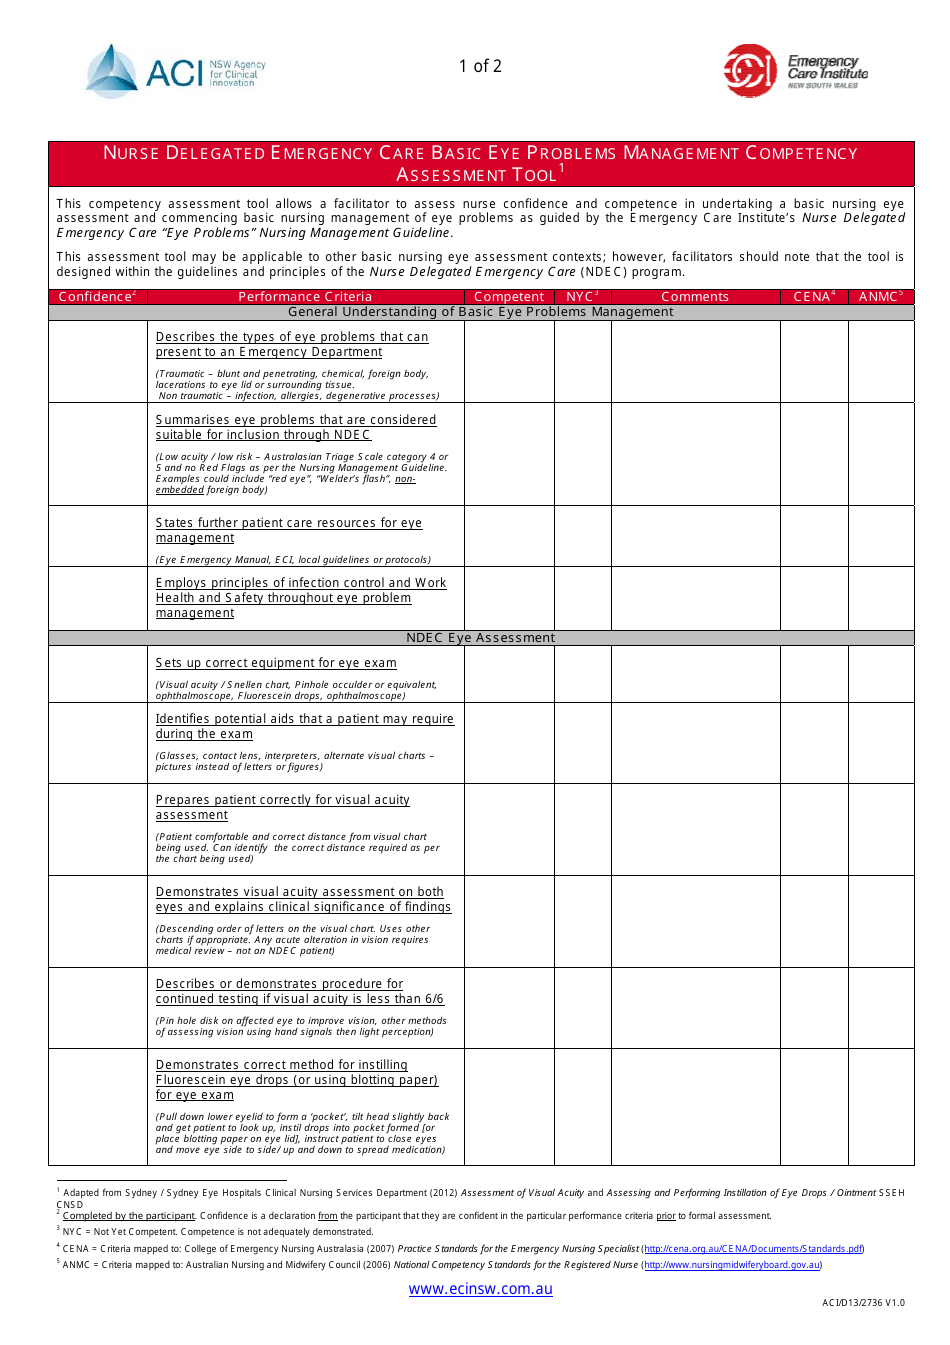 Form ACI / D13 / 2736 Nurse Delegated Emergency Care Basic Eye Problems Management Competency Assessment Tool - New South Wales, Australia, Page 1